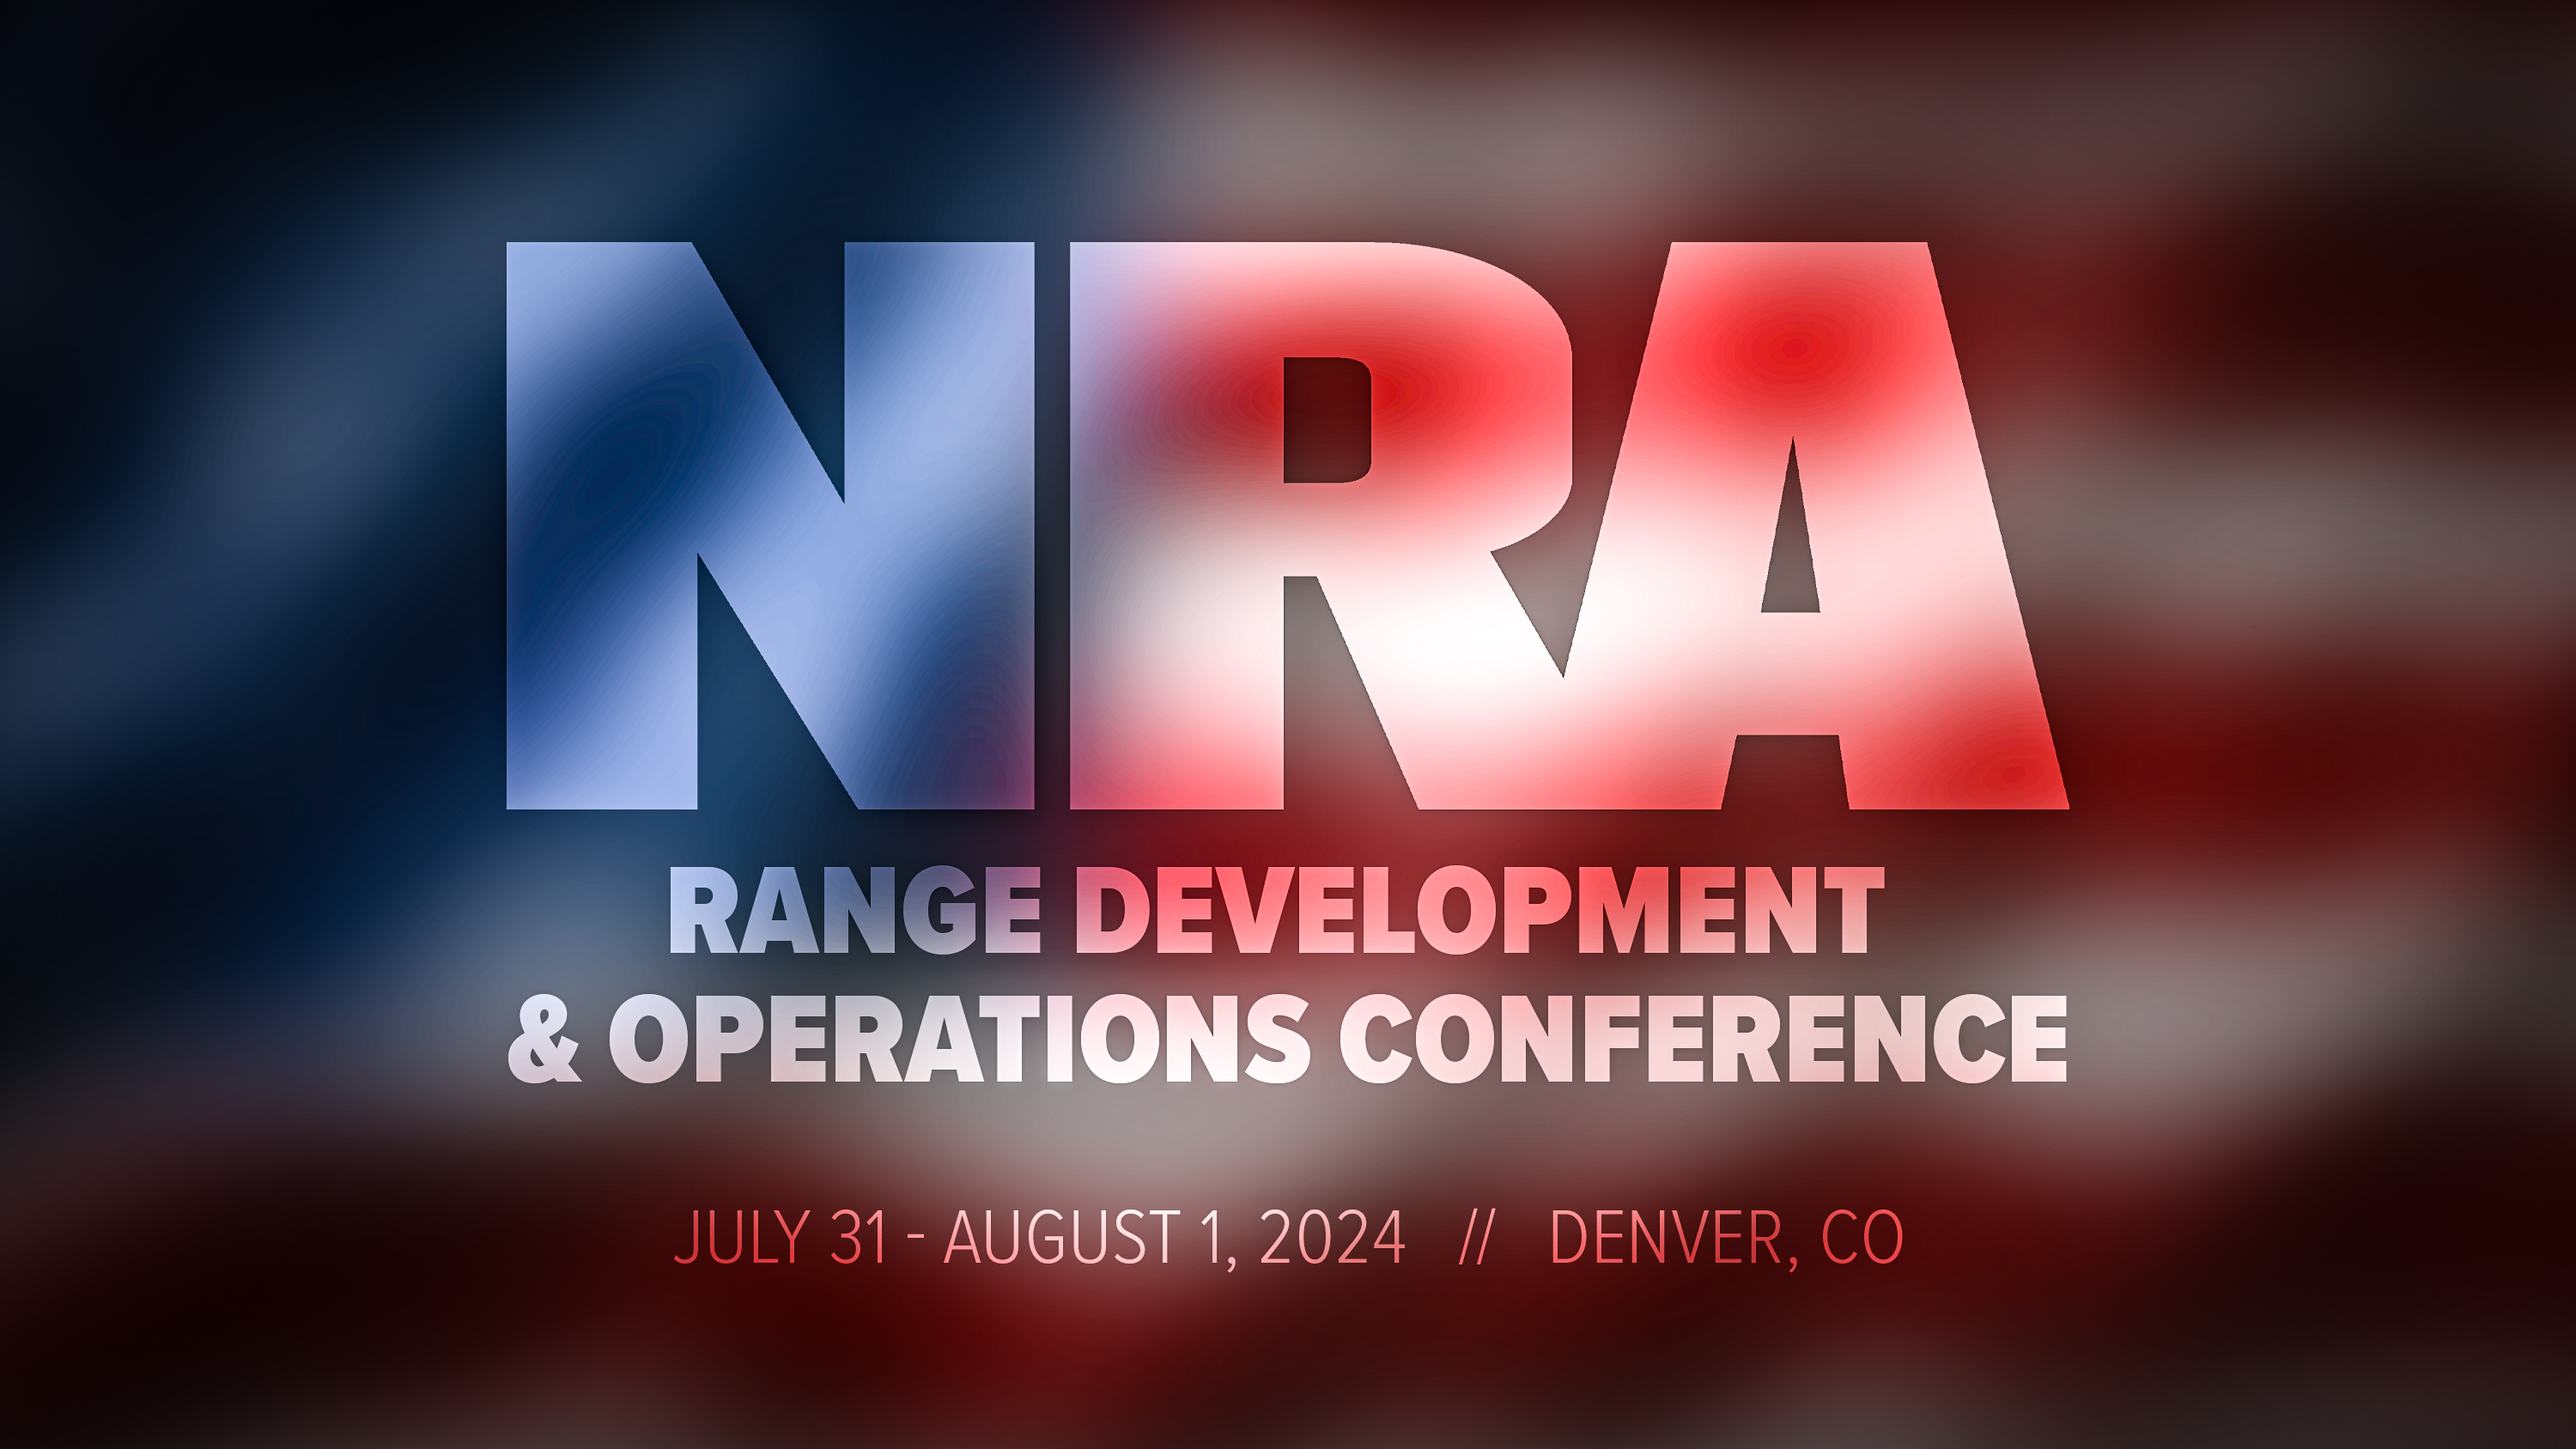 NRA Range Development & Operations Conference to be held in Denver, Colorado in 2024